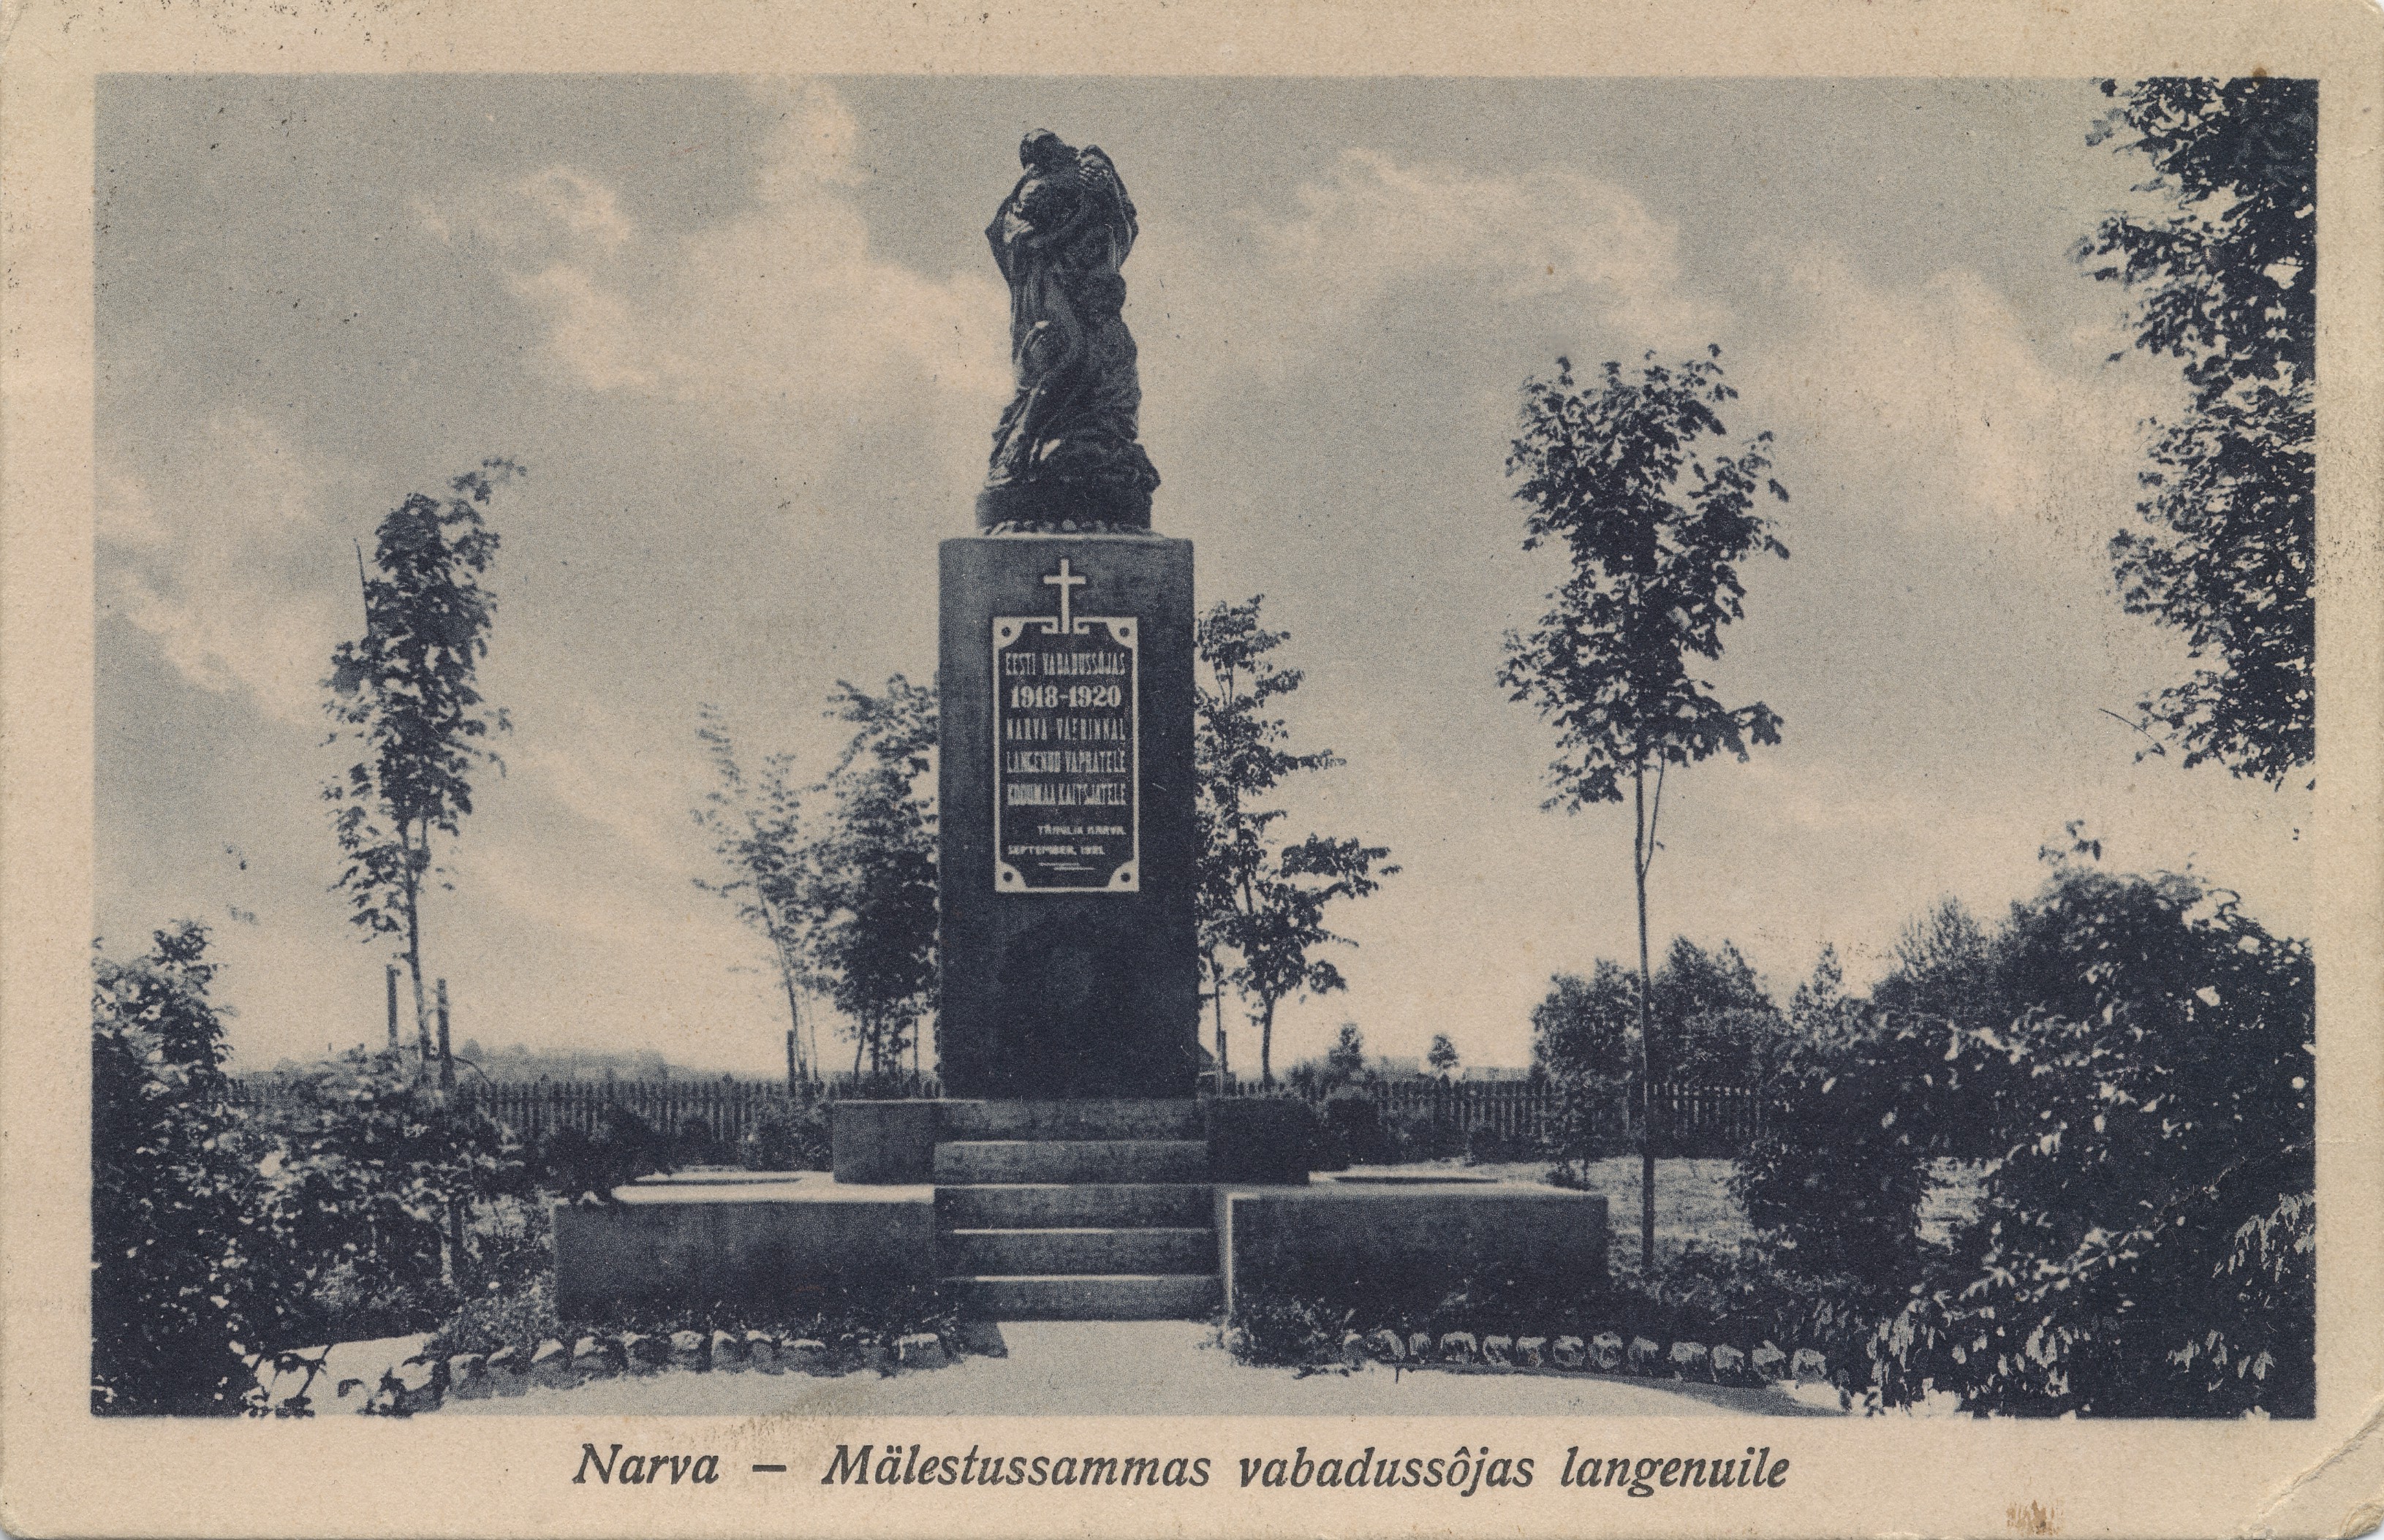 Narva monument for those who fell in the war of freedom